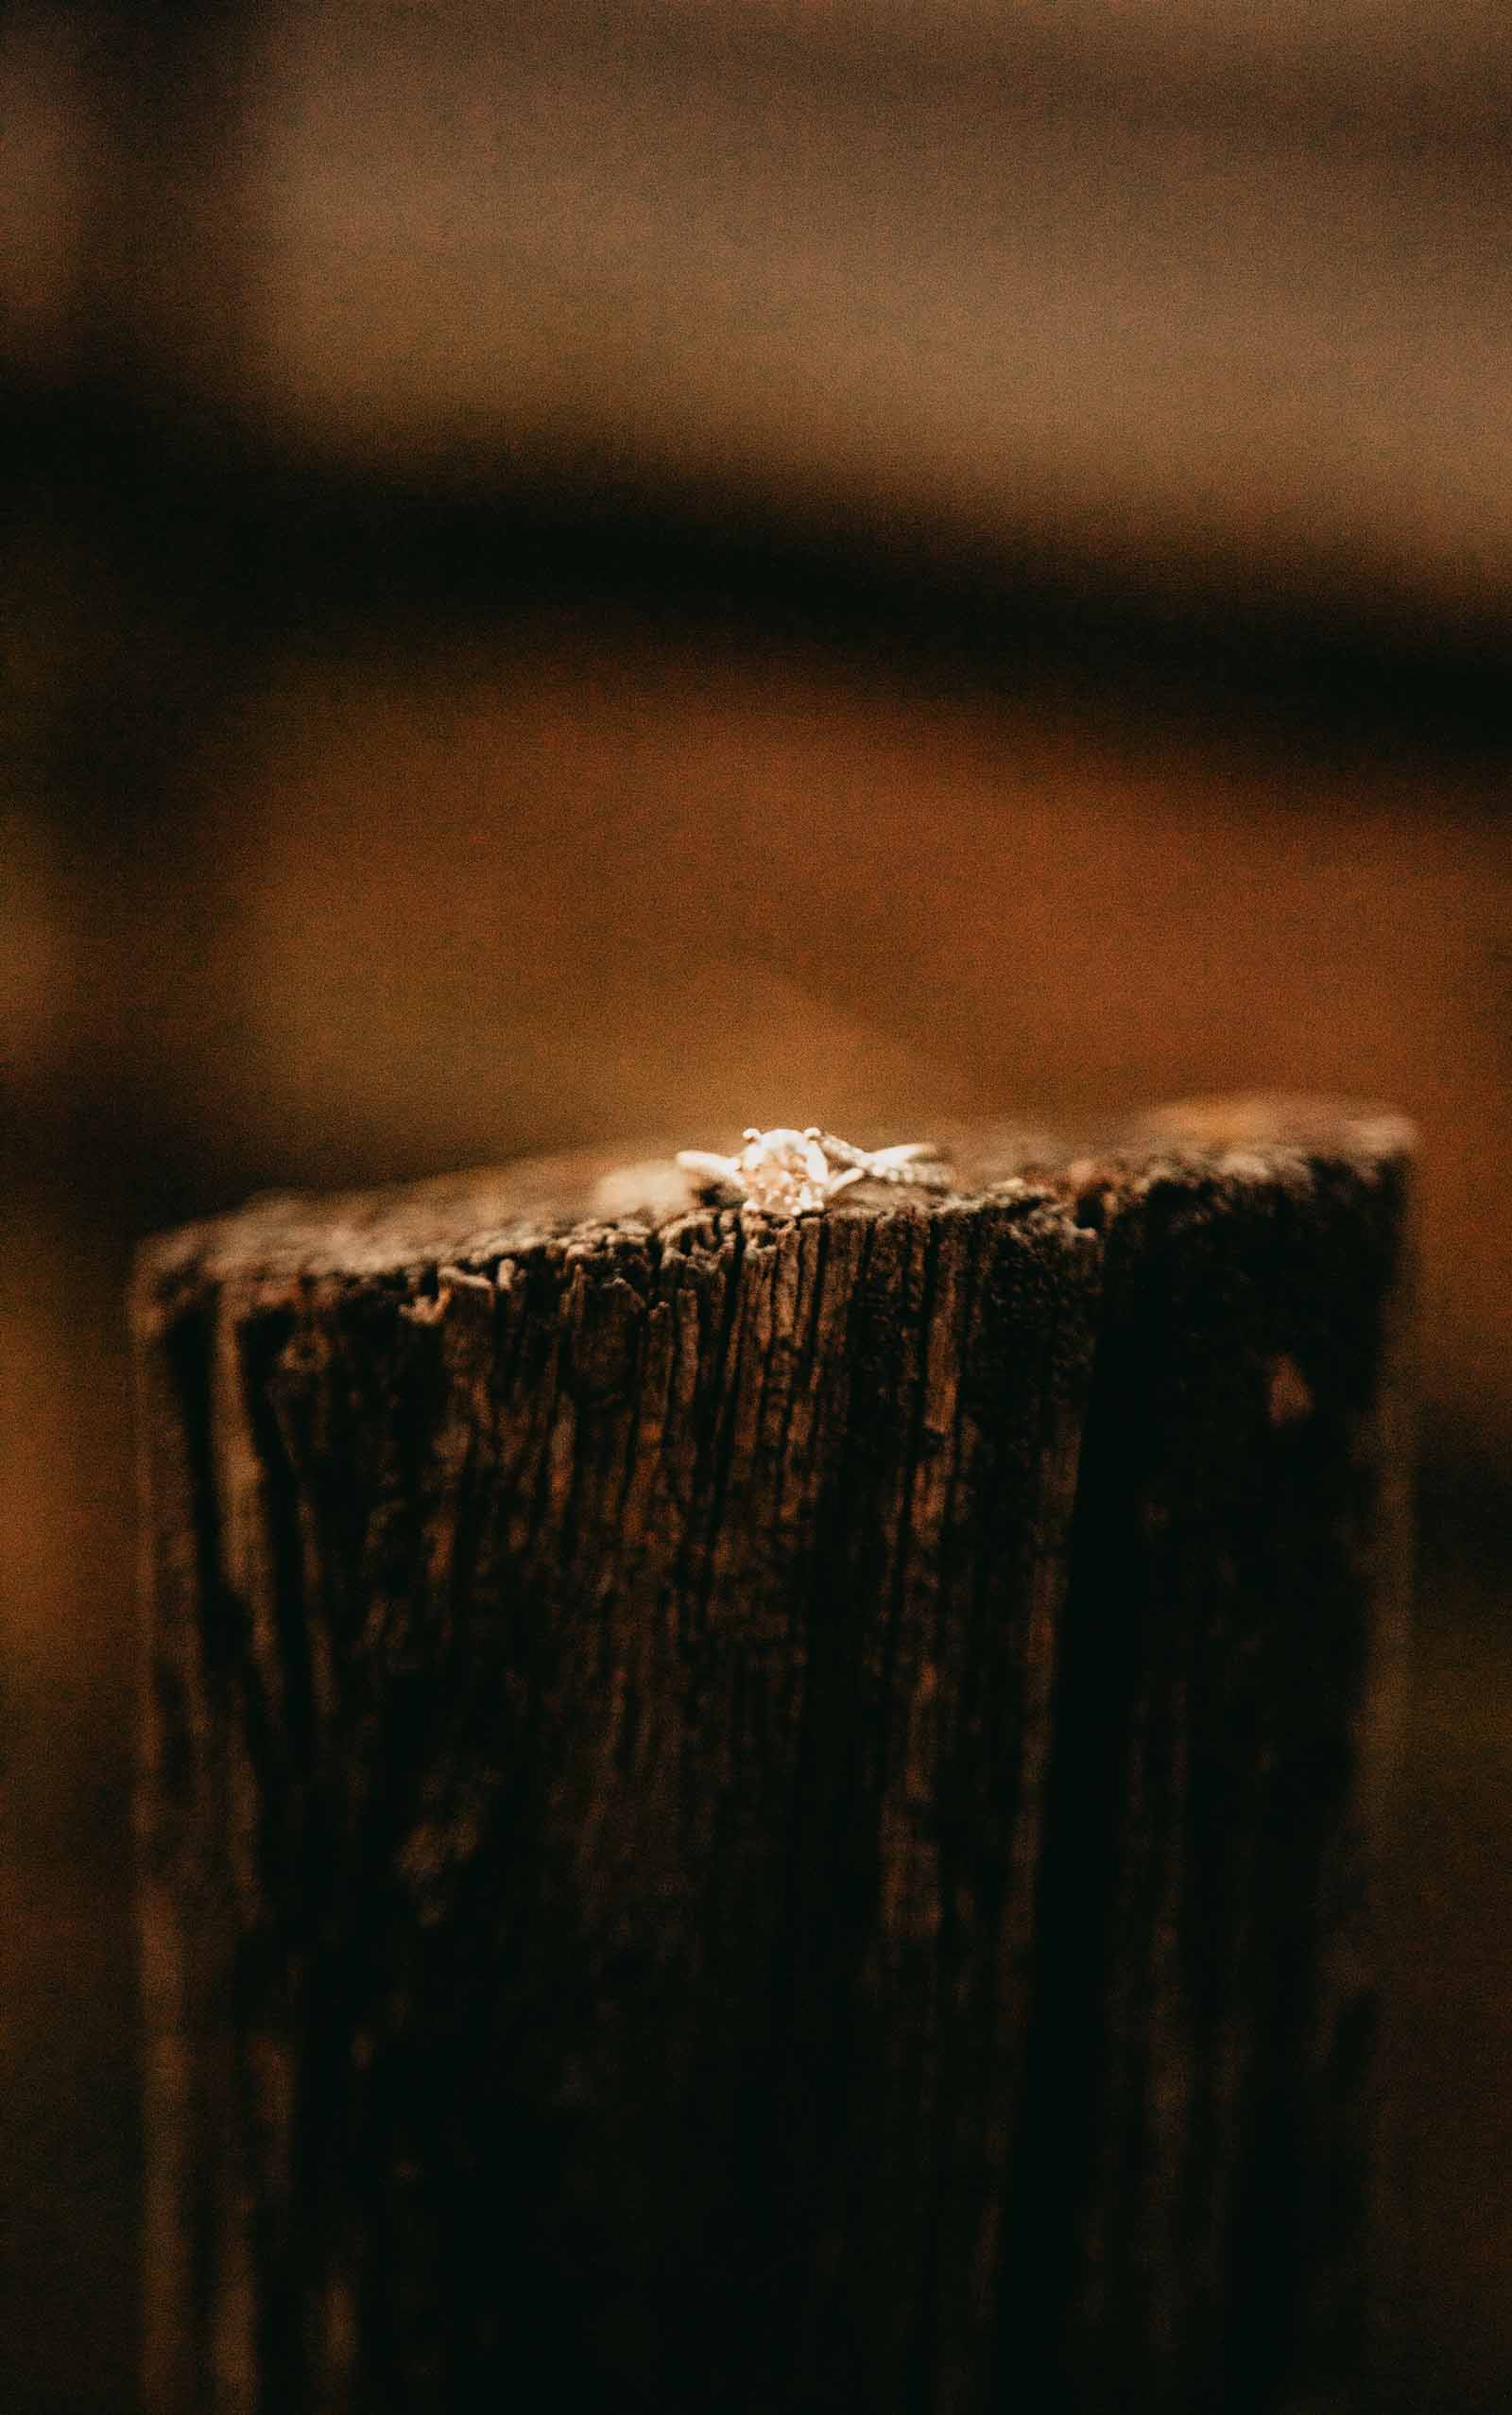 Engagement ring on a stump